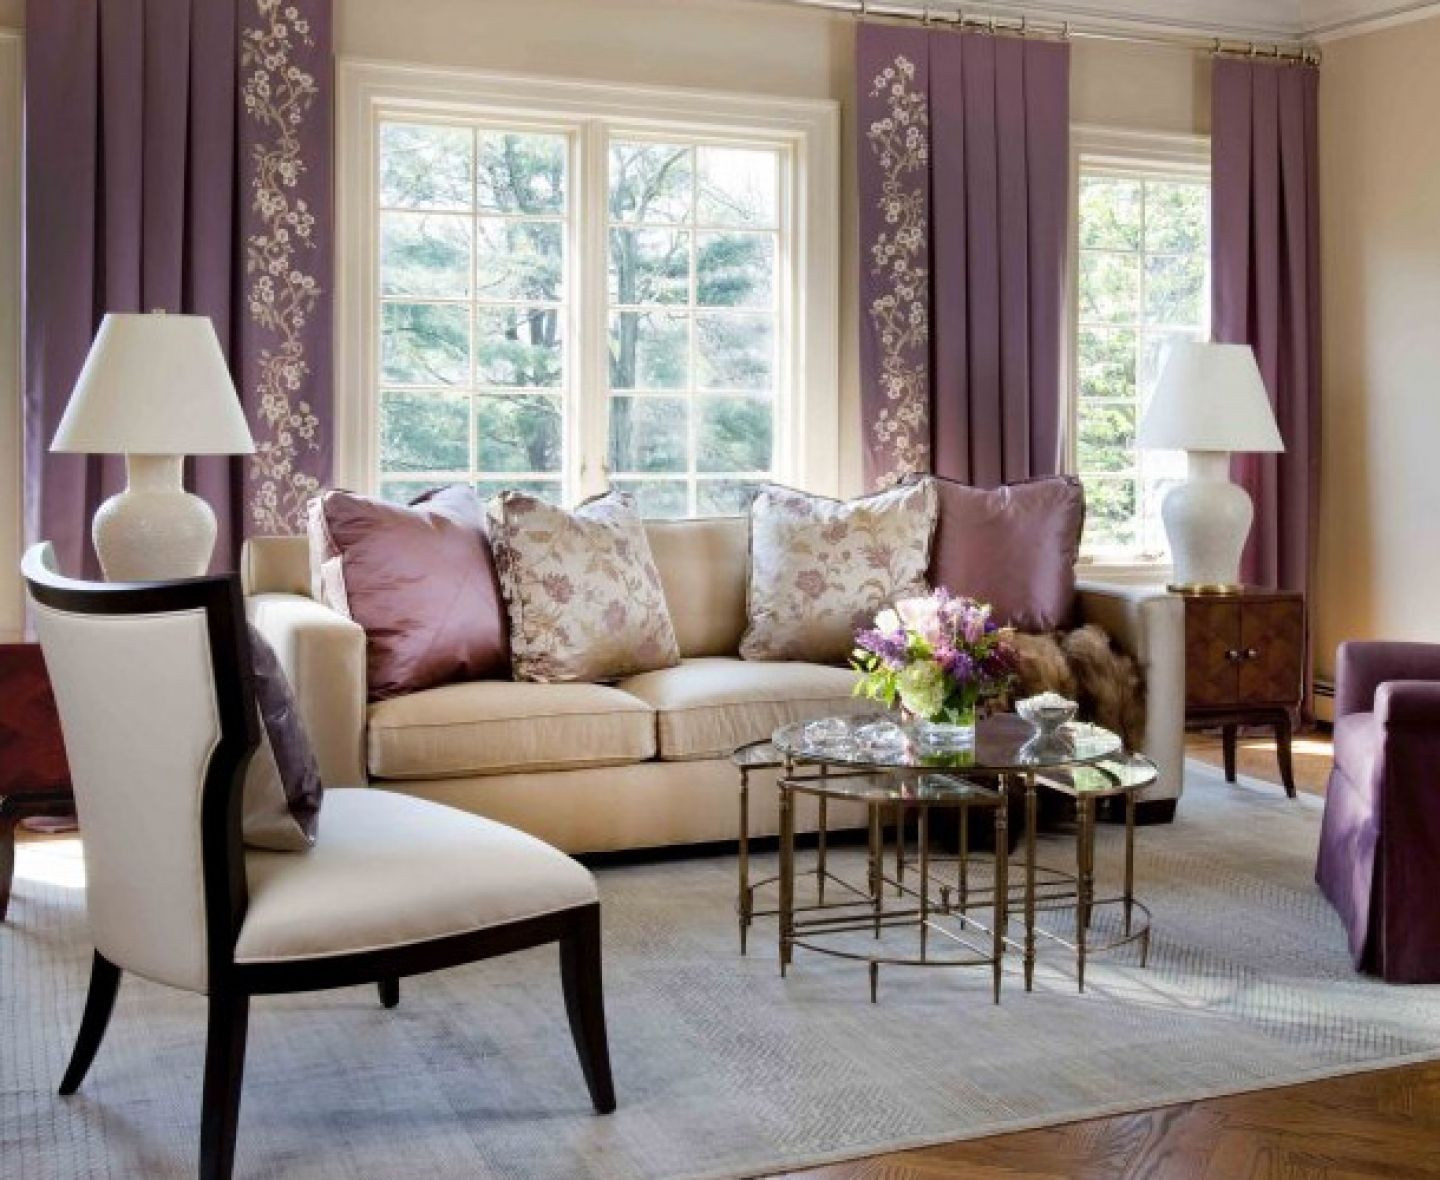 Vintage Living Room Ideas
 Lovely Vintage Living Room Ideas with Glamour Furniture